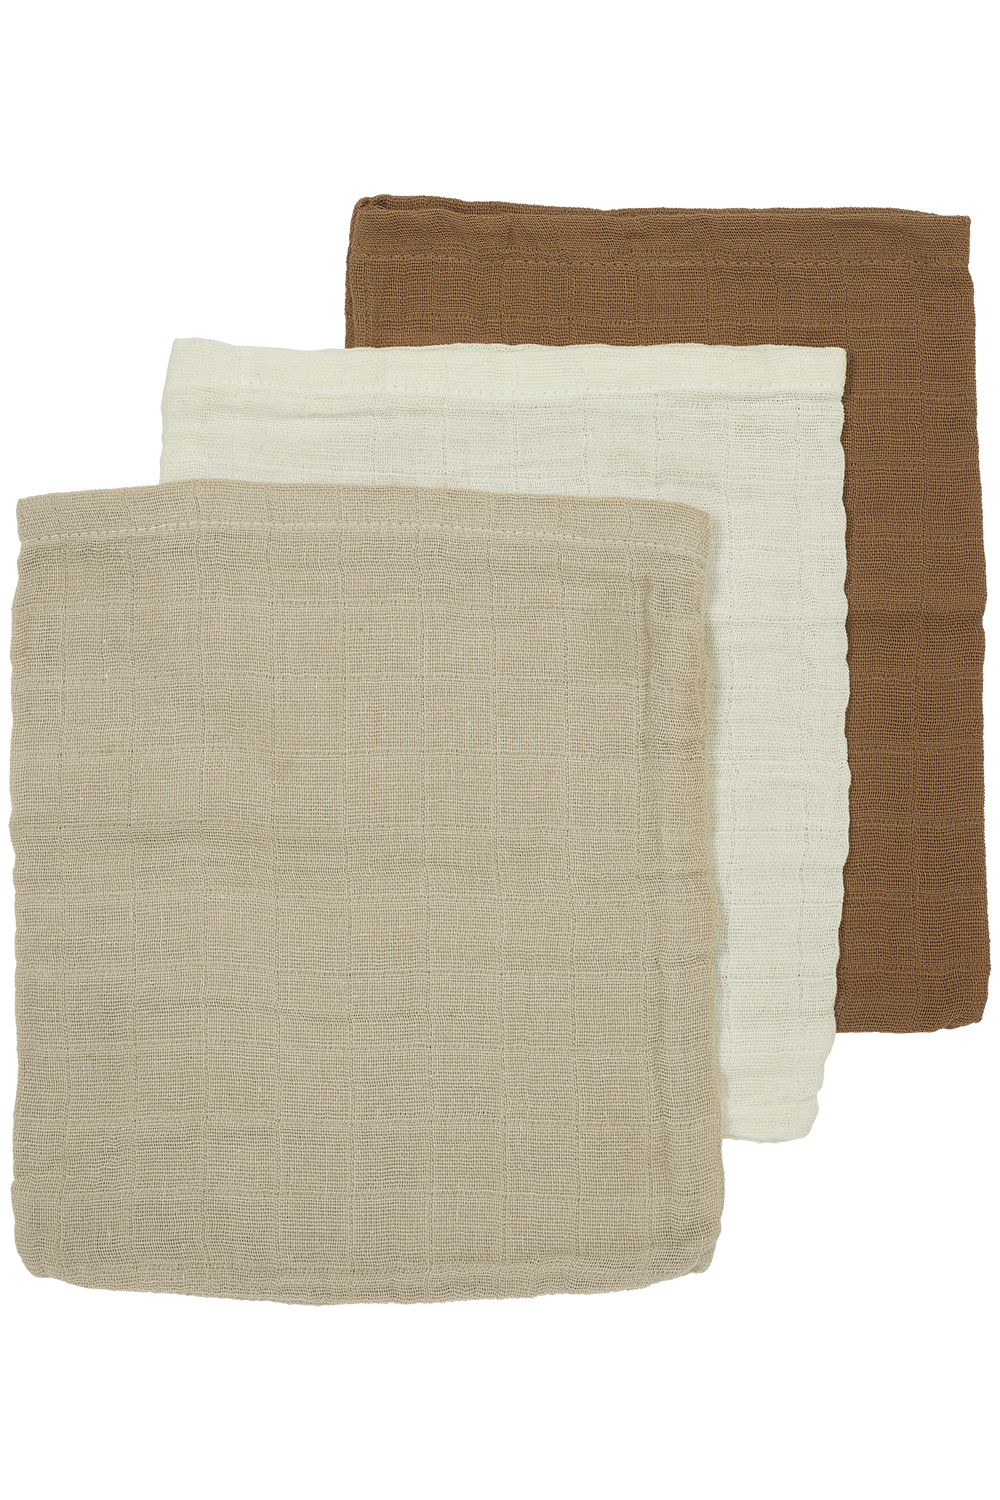 Washcloth 3-pack pre-washed muslin Uni - offwhite/sand/toffee - 20x17cm